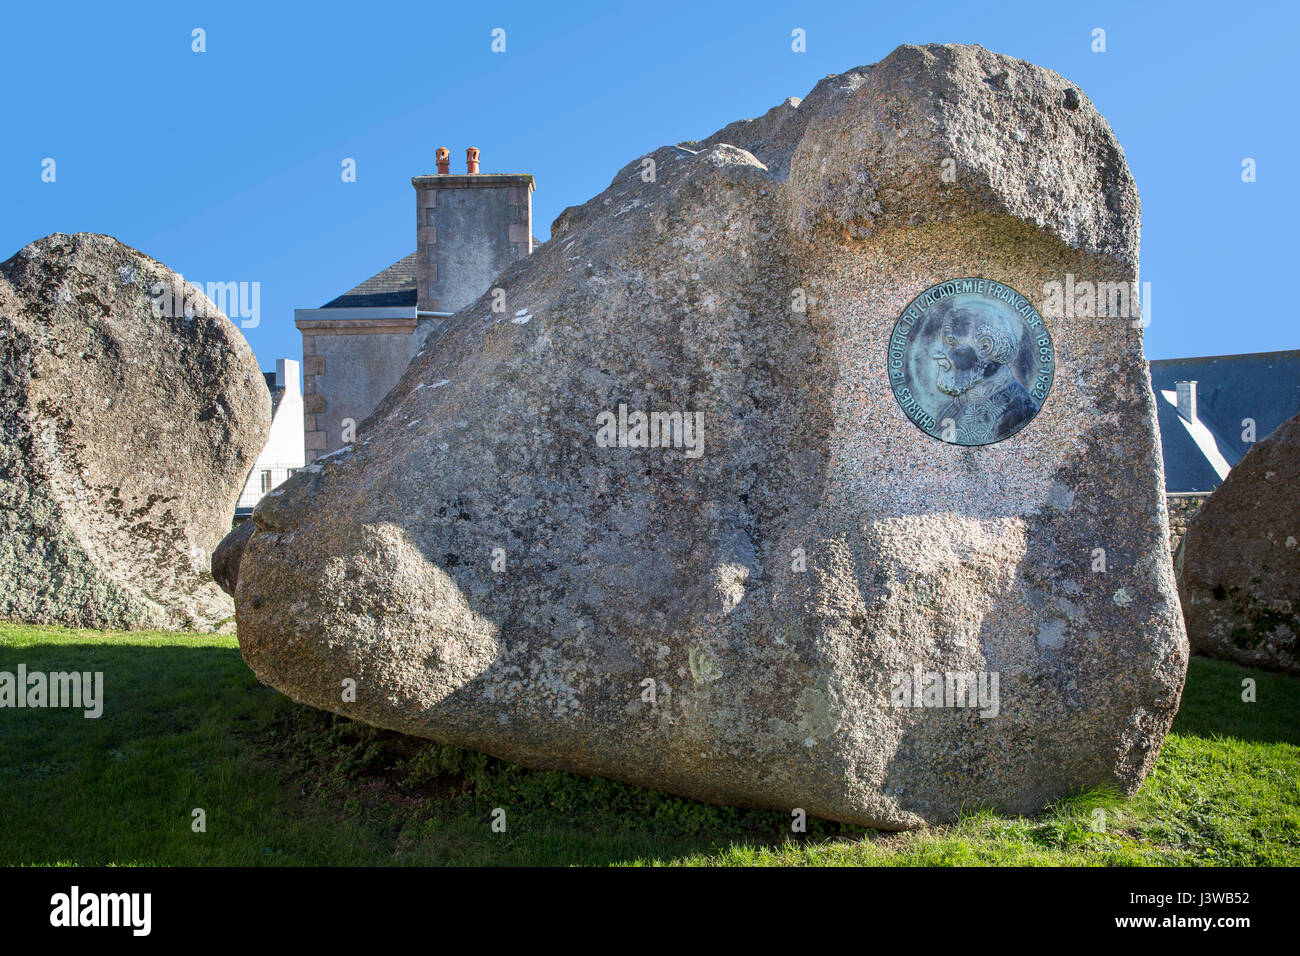 Huge boulder with a bronze plaque honoring French poet, novelist, and historian Charles Le Goffic in Tregastel, Brittany, France - He was a member of  Stock Photo